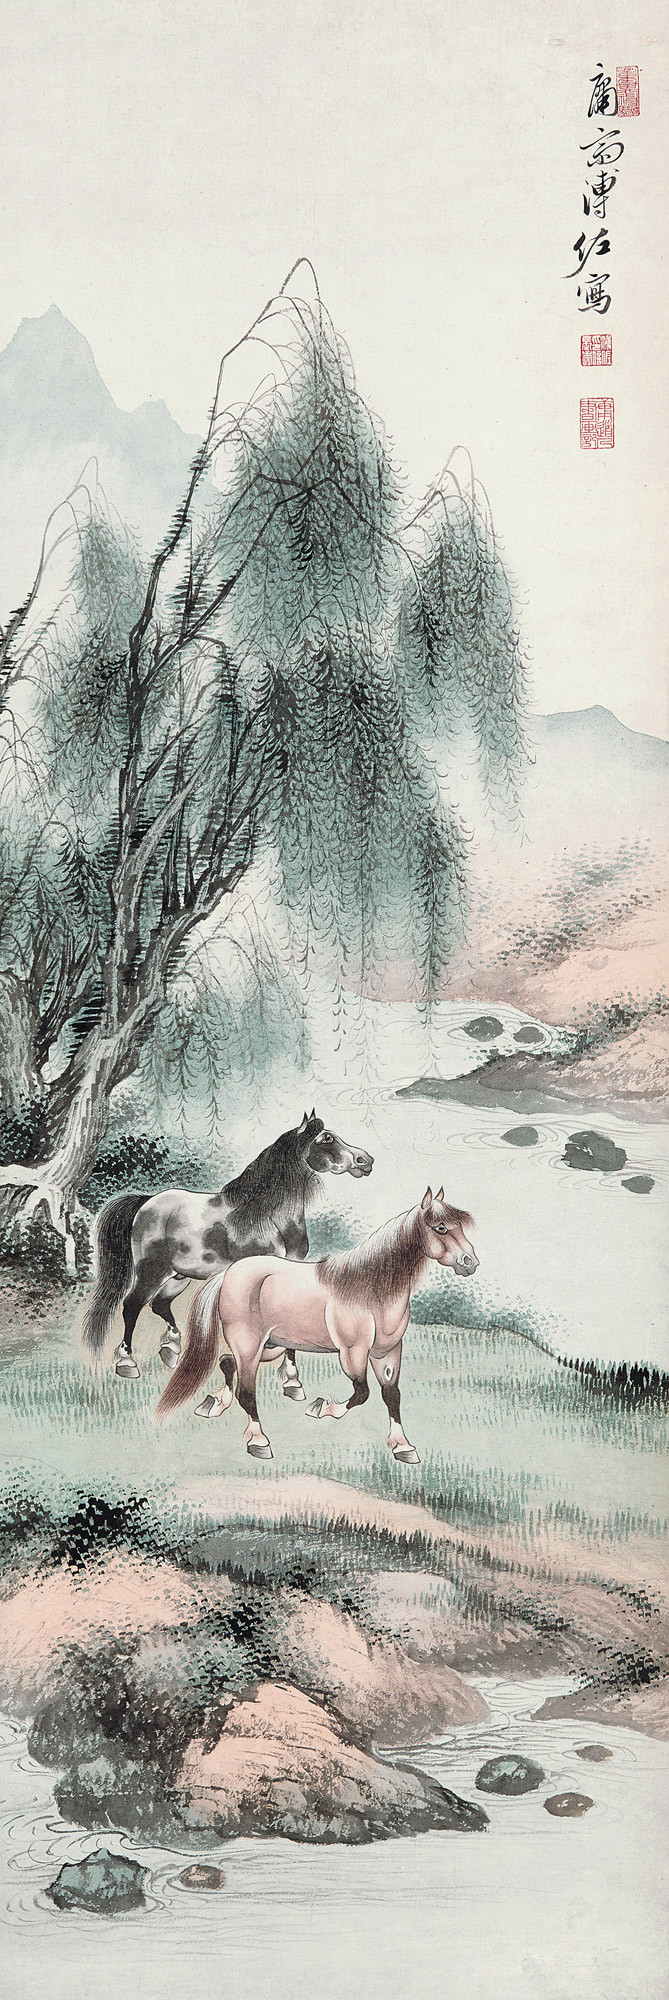 Horses Under The Willow